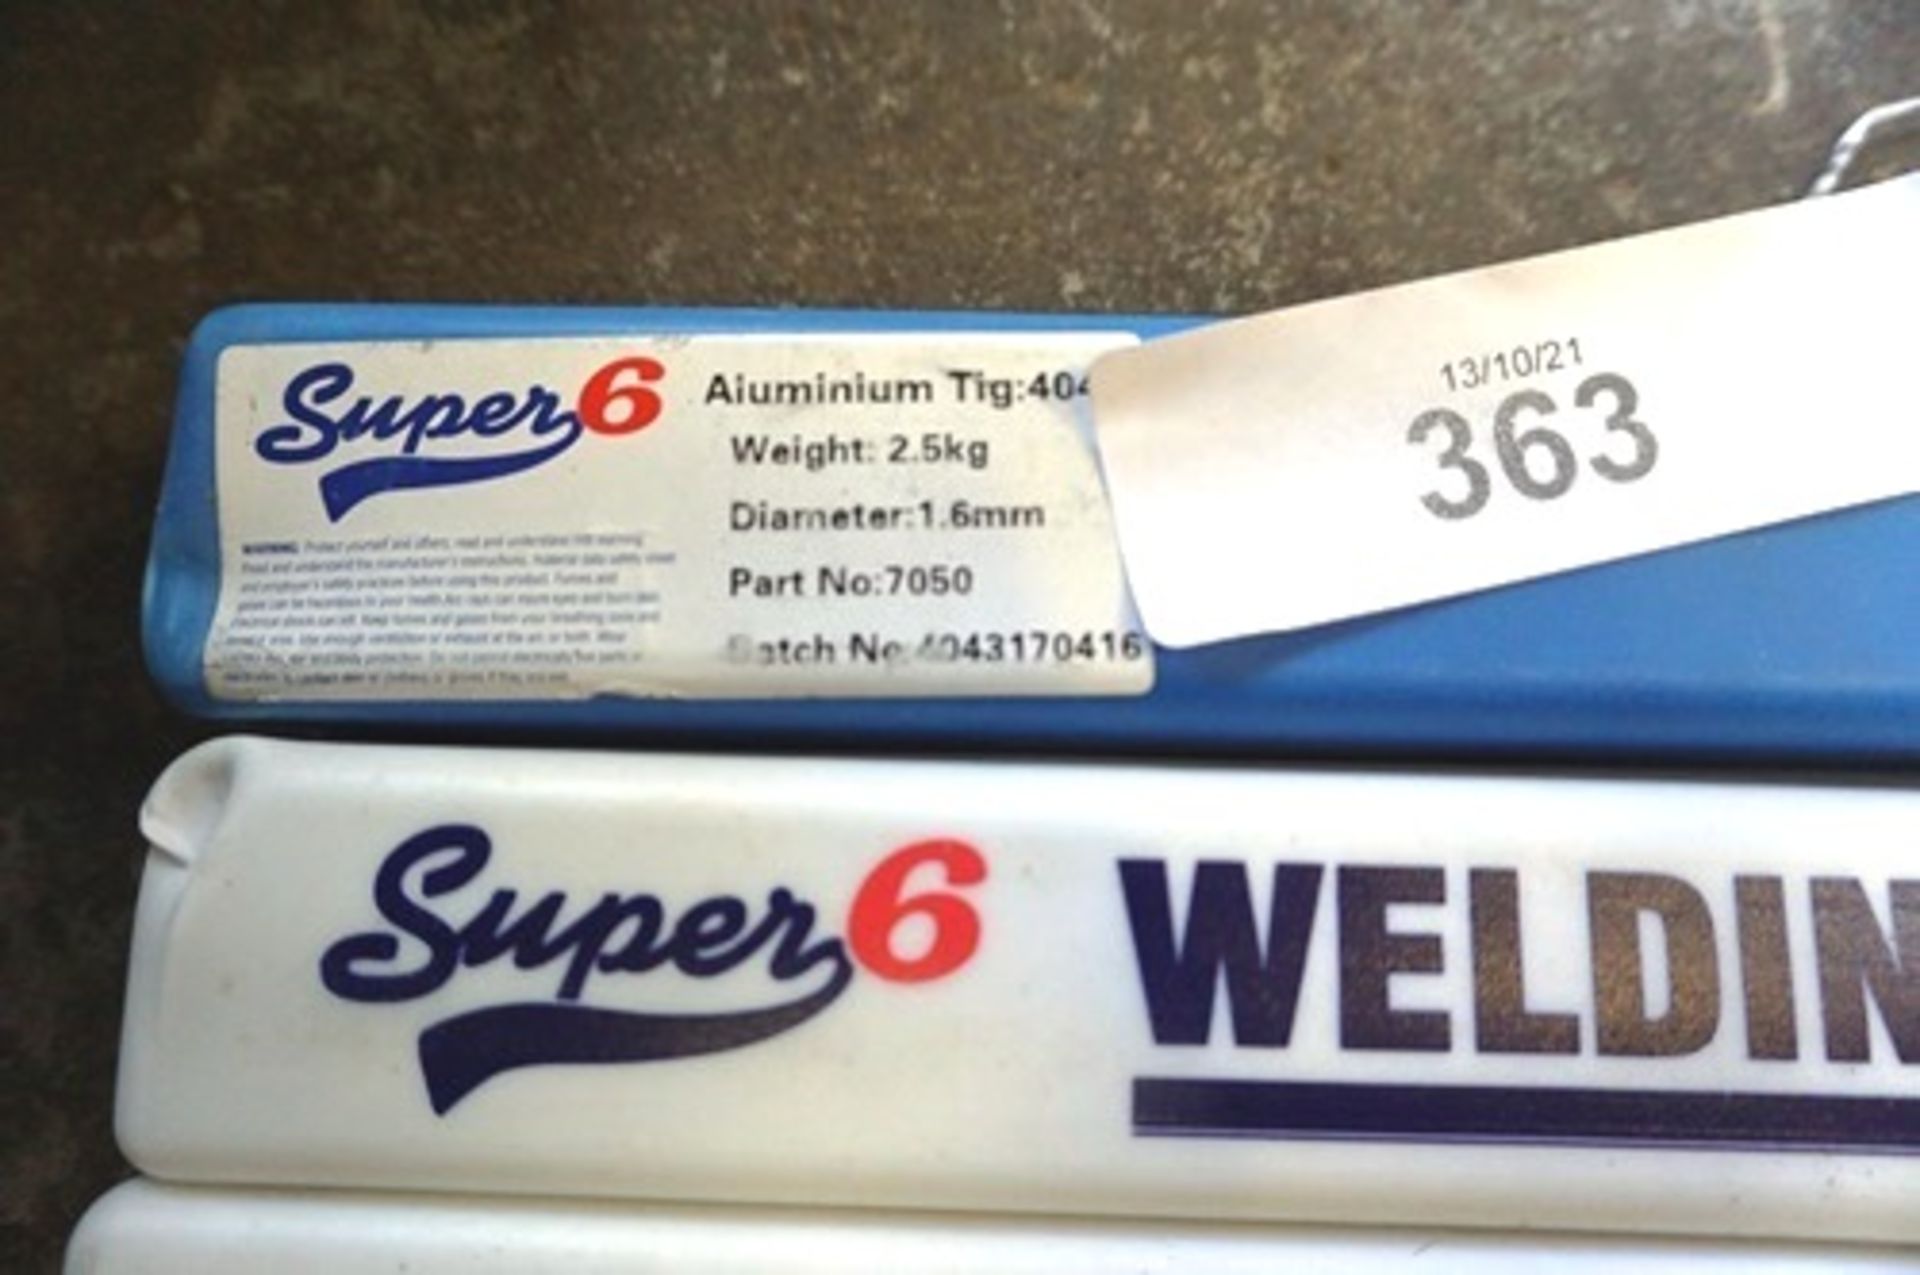 4 x packs of Super 6 comprising 3 x aluminium Tig 4043 1.6mm and 1 x stainless steel tig welding - Image 3 of 3